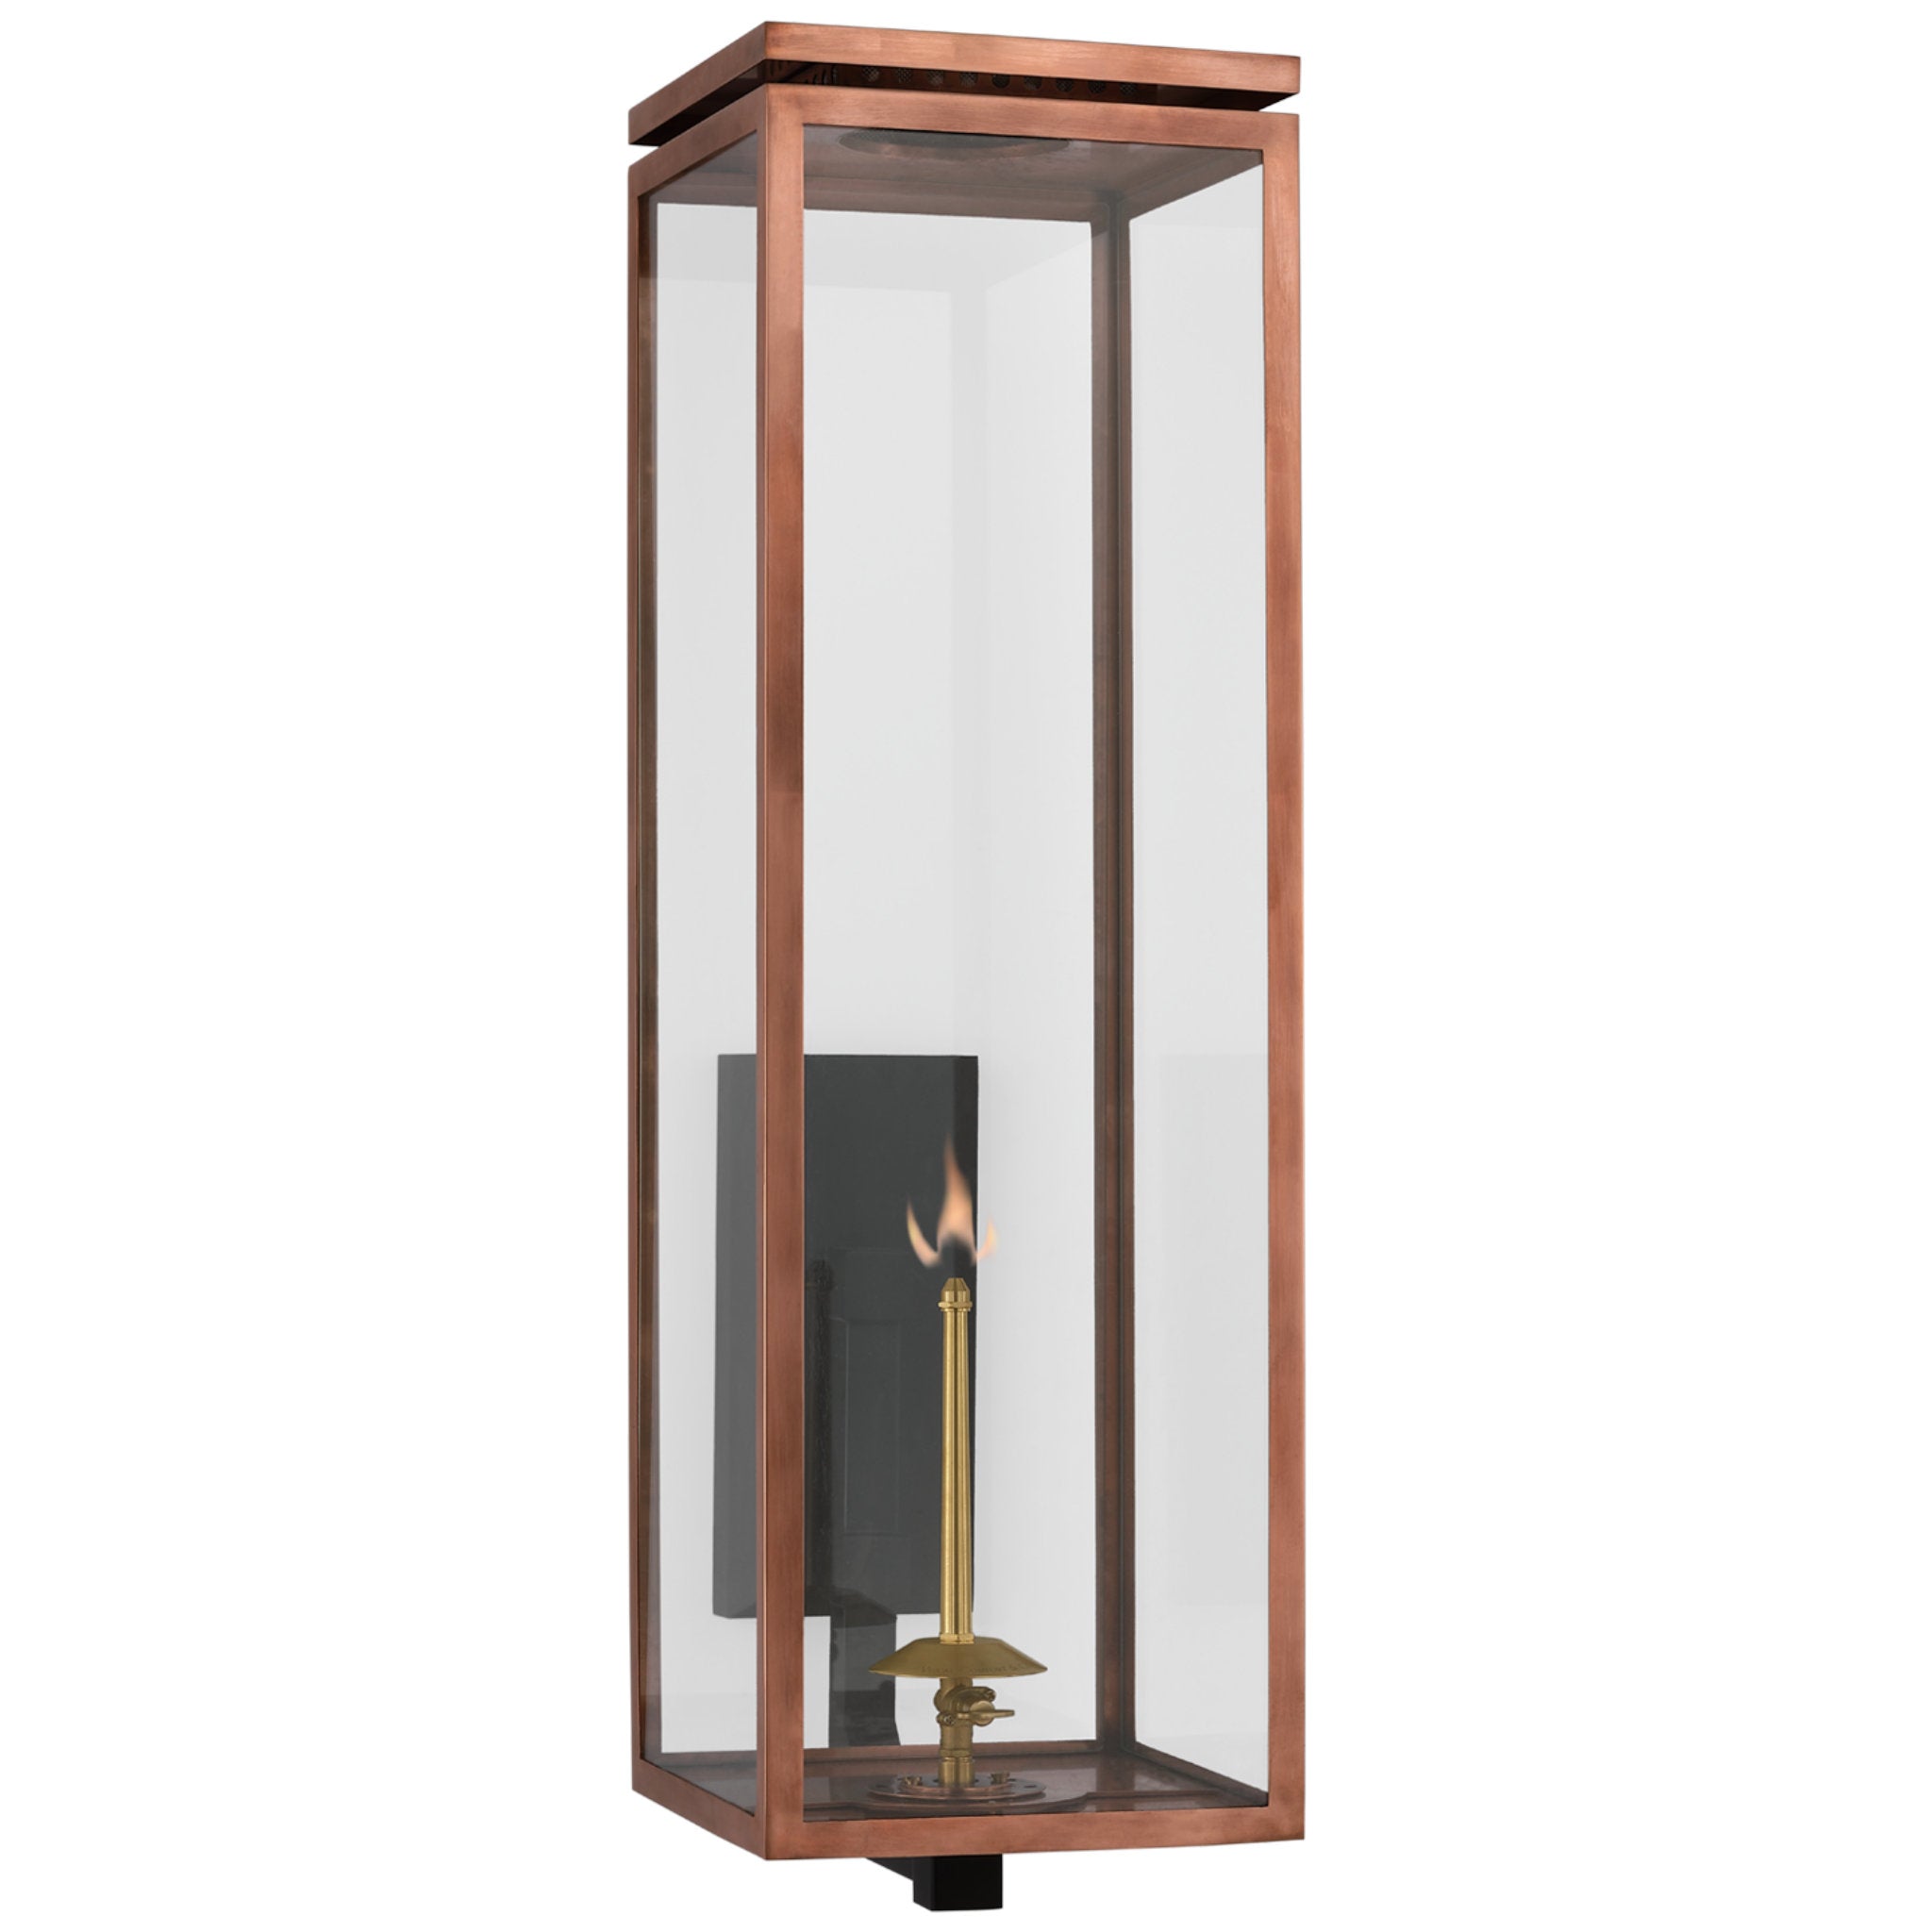 Chapman & Myers Fresno Grande Bracketed Gas Wall Lantern in Soft Copper with Clear Glass